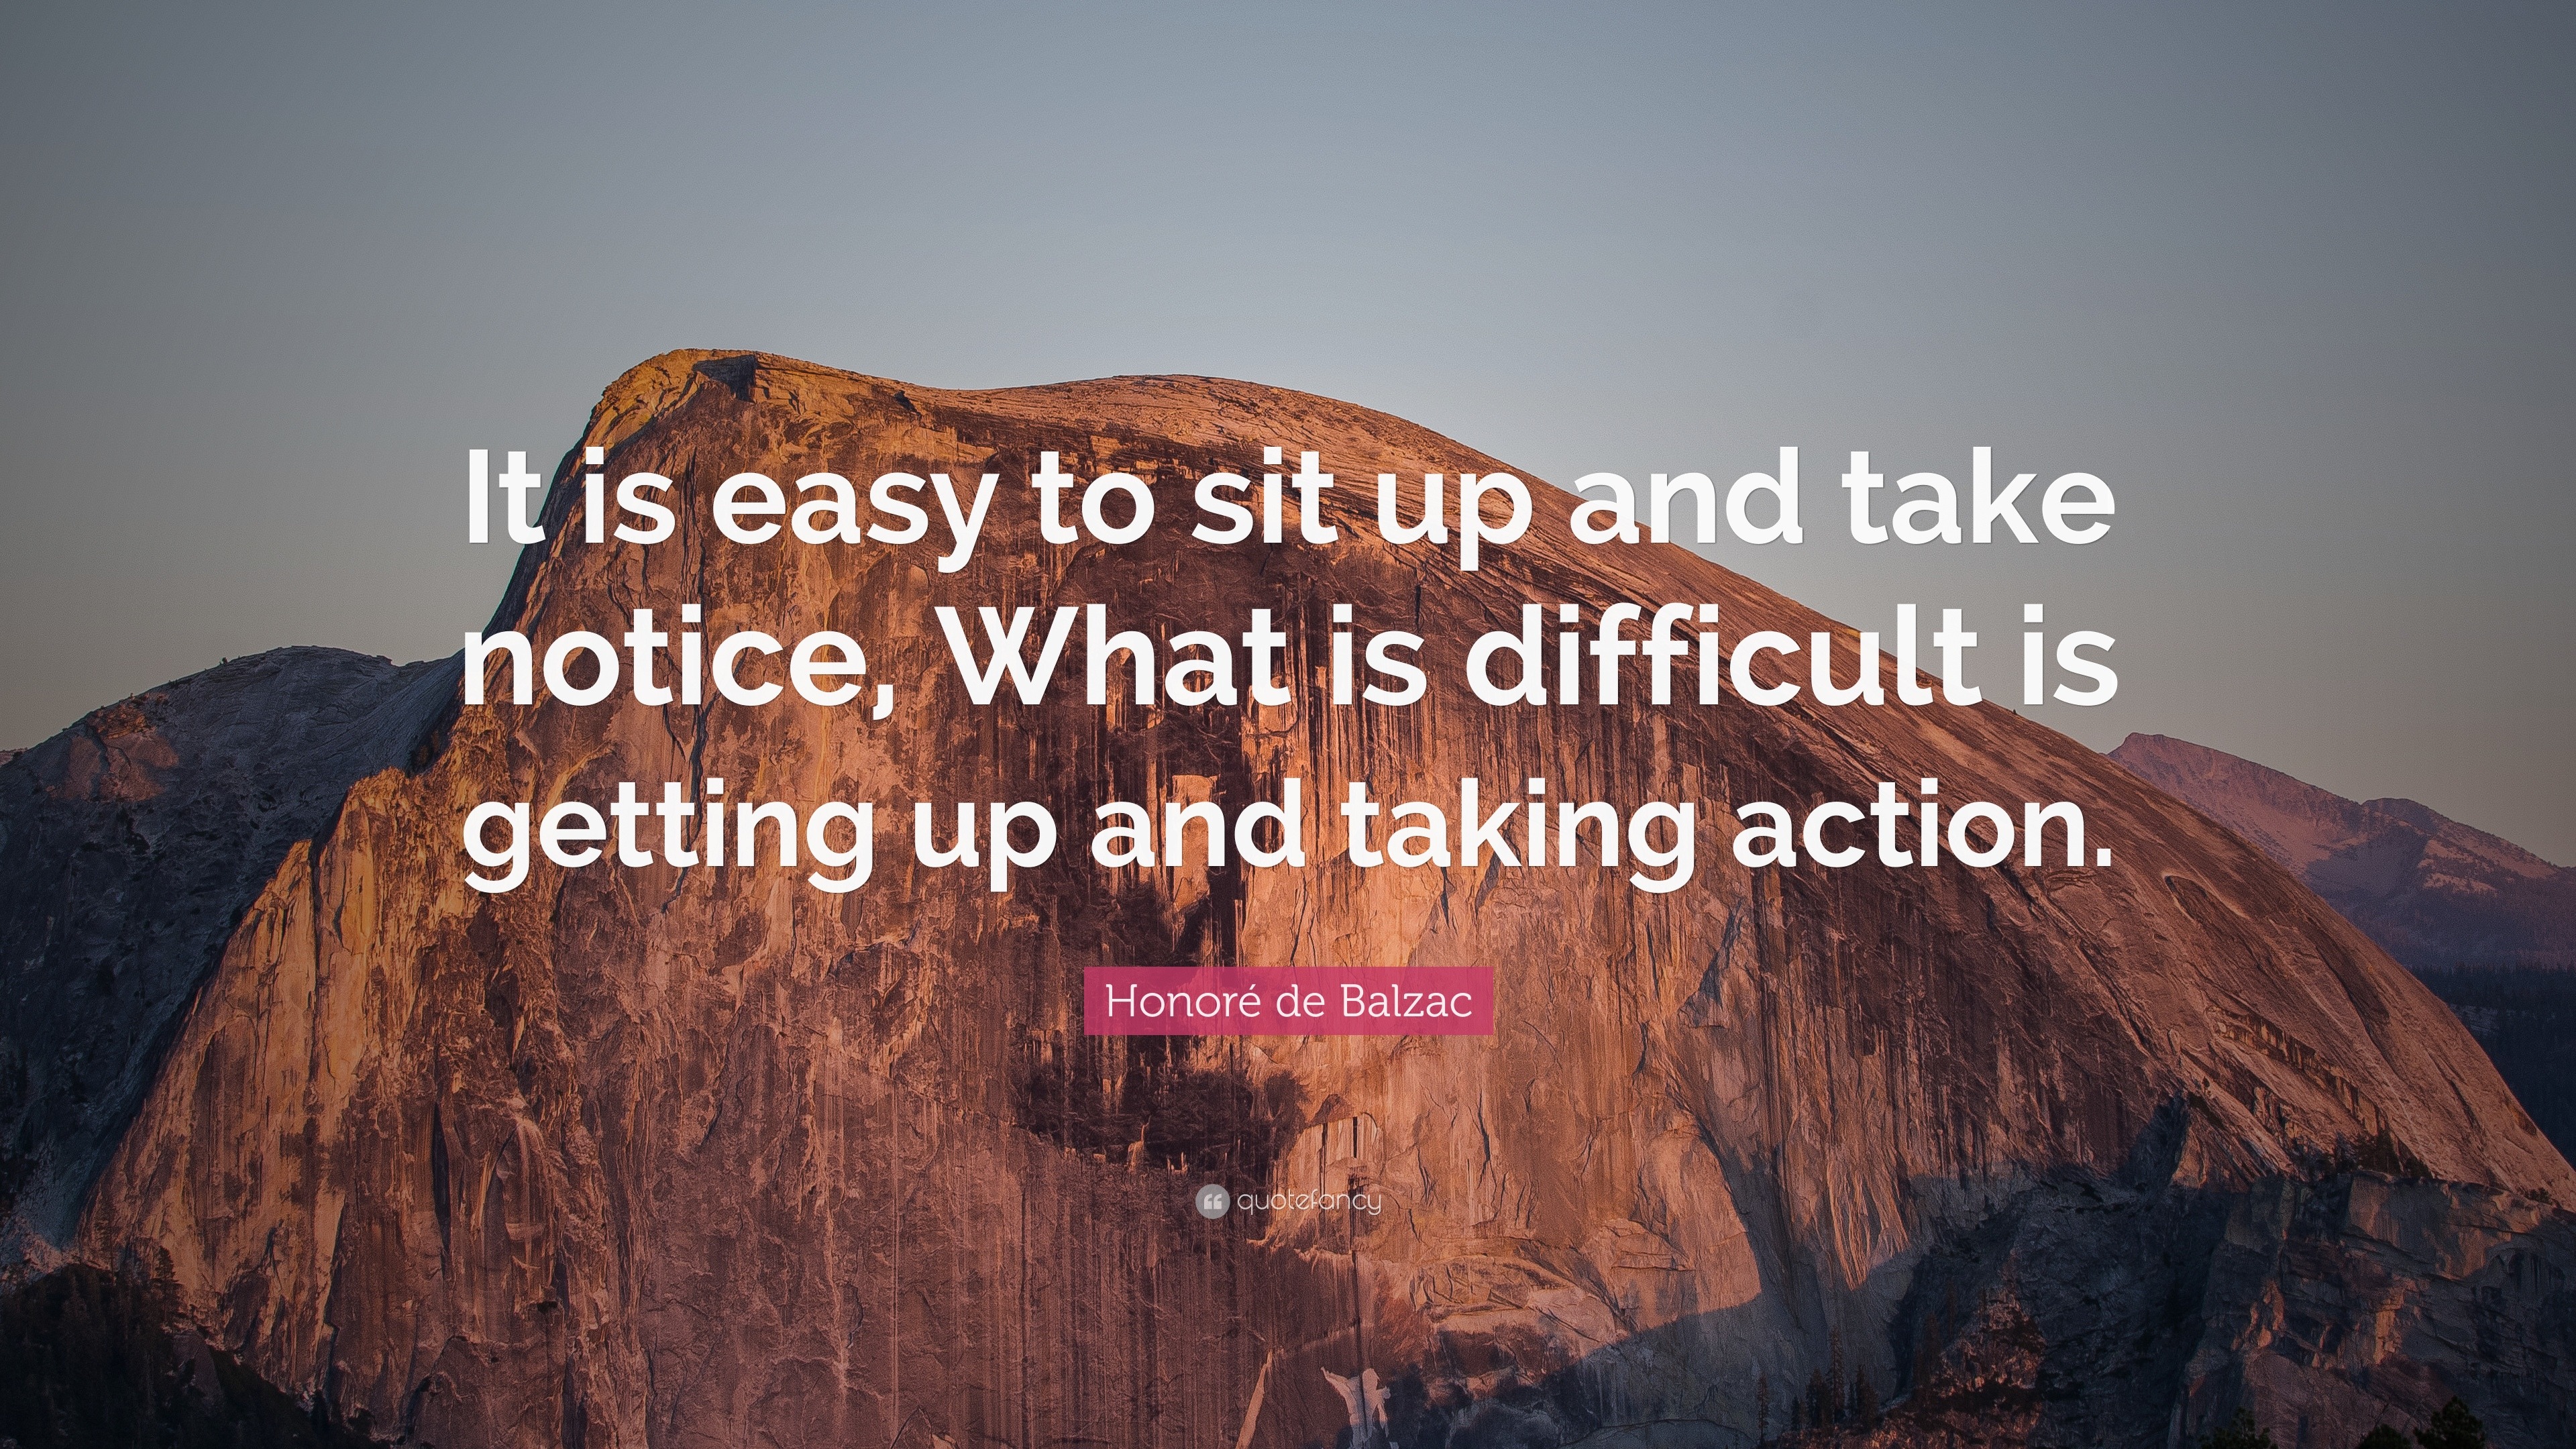 Honoré de Balzac Quote: “It is easy to sit up and take notice, What is difficult is ...